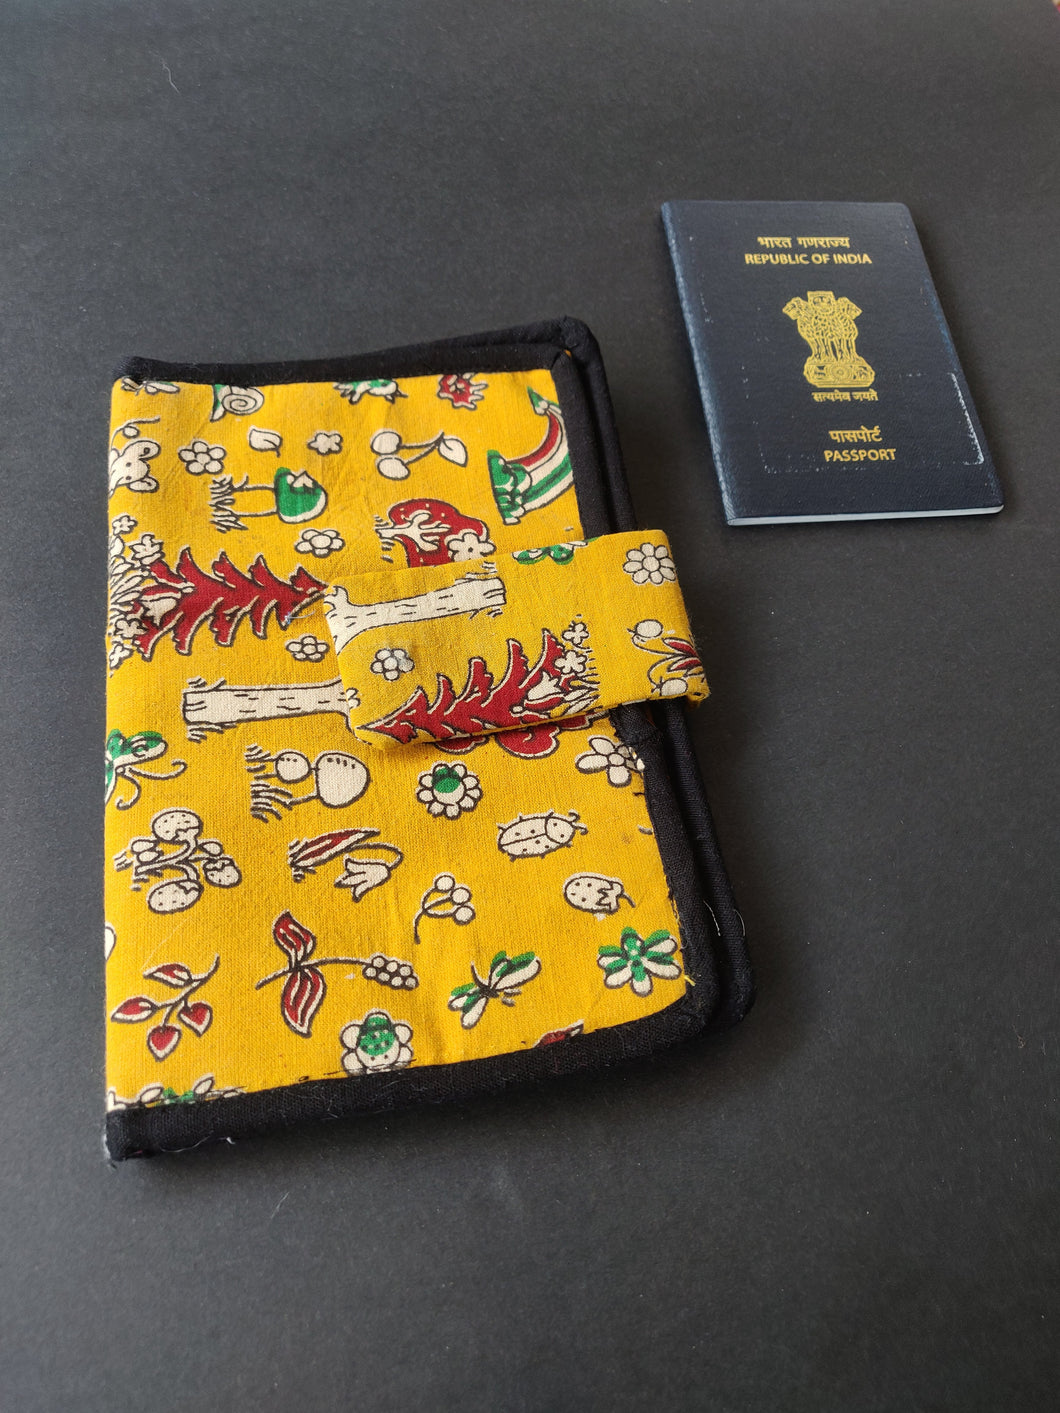 Sooti Passport wallet can hold 2 passports and few frequent flyer / ID Cards.